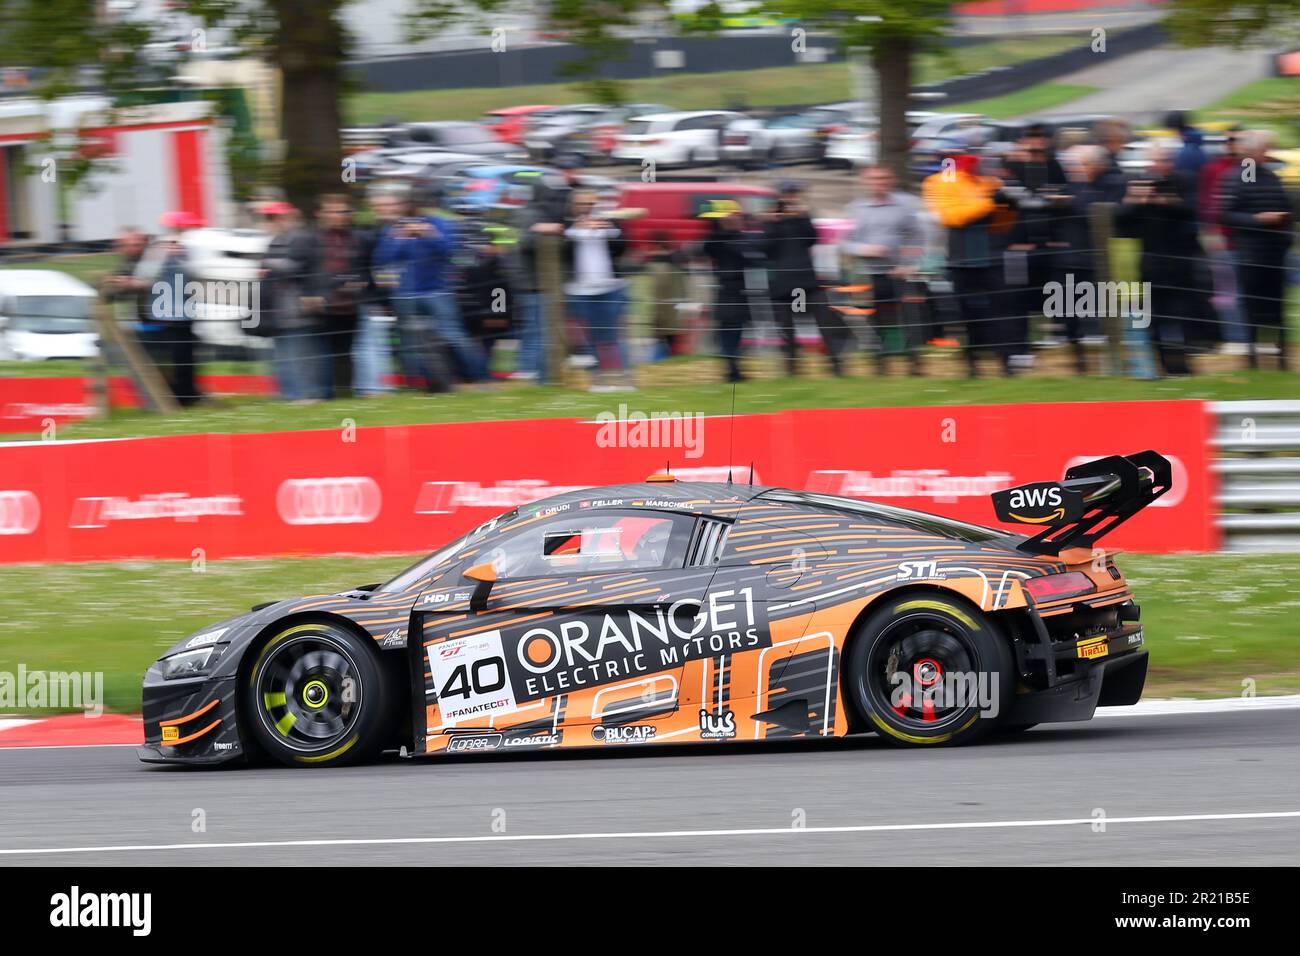 Mattia Drudi - Tresor Orange 1 -  driving Audi R8 LMS evo II GT3 number 40 in the 2023 GT World Challenge Europe Sprint Cup at Brands Hatch in May 202 Stock Photo